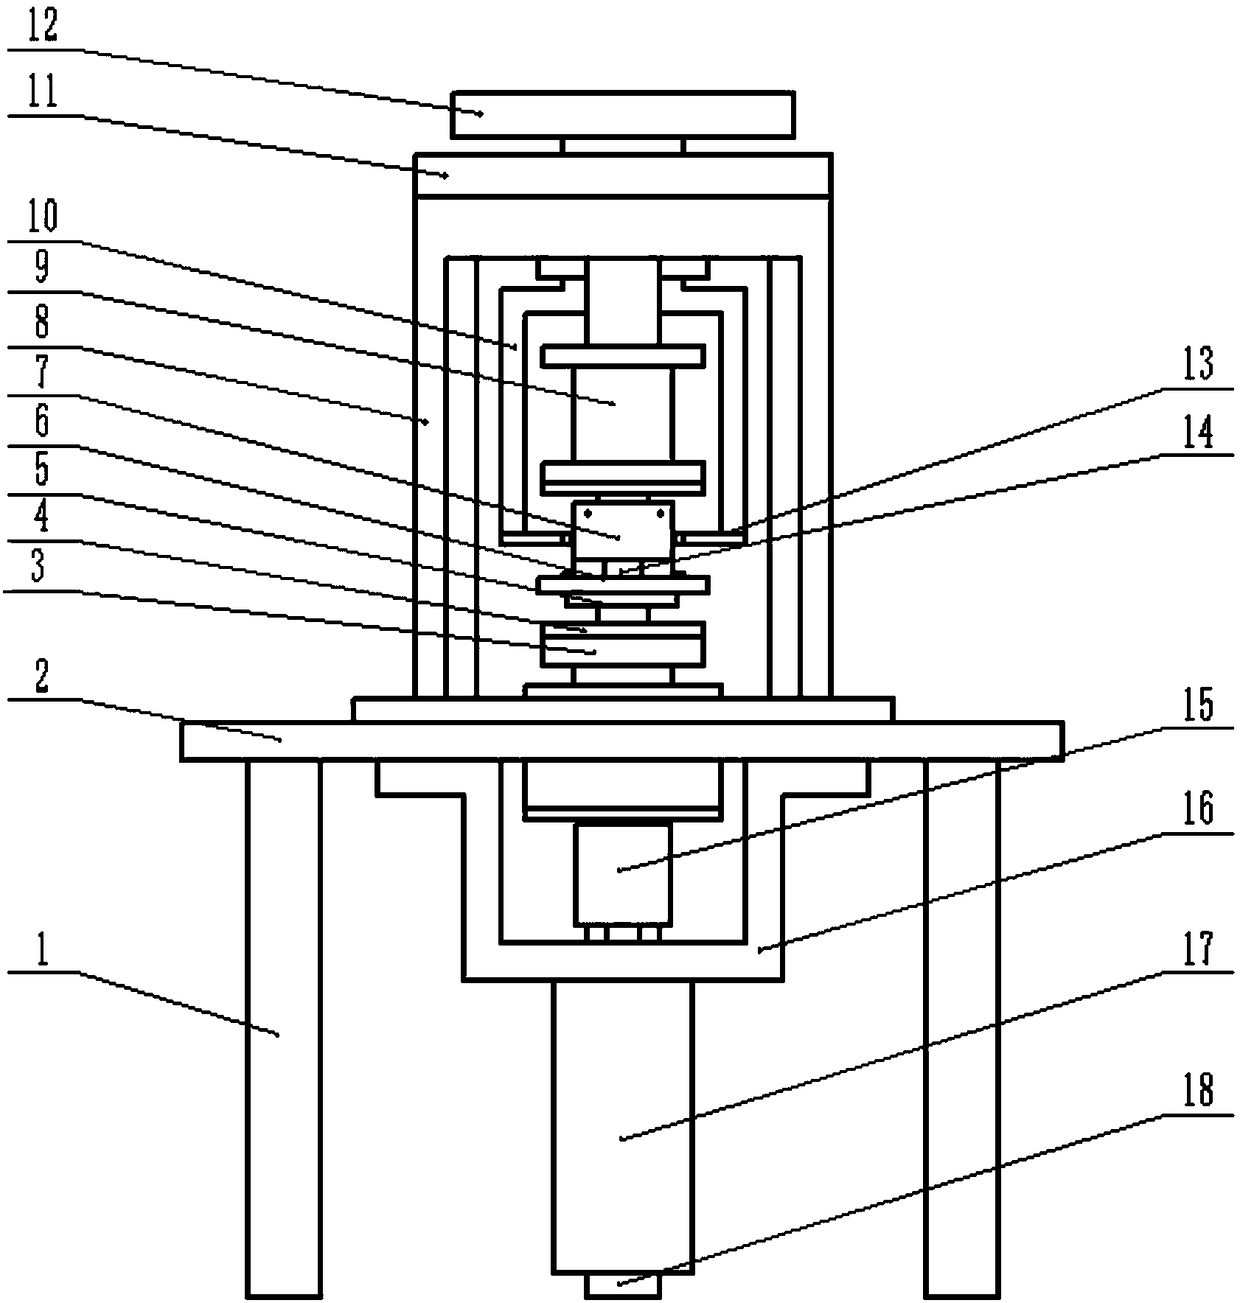 A surface-to-surface contact torsion fretting friction and wear test system and its control method